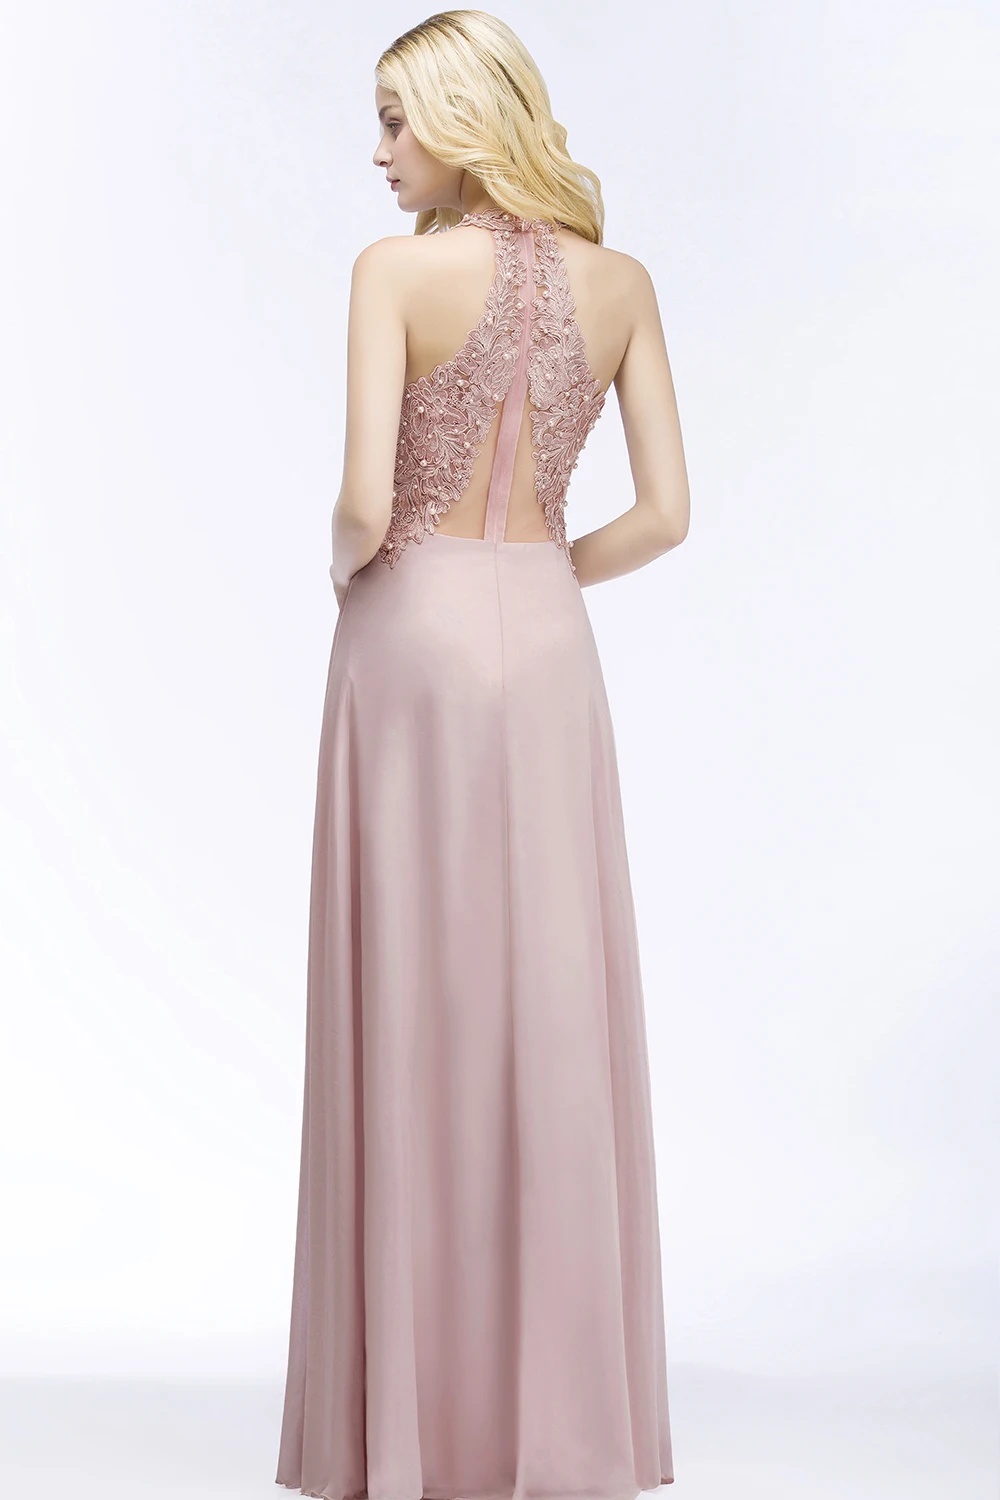 Robe demoiselle d'honneur Sexy V Neck Dusty Pink Lace Bridesmaid Dresses Long A Line Chiffon Pears Formal Prom Party Gowns